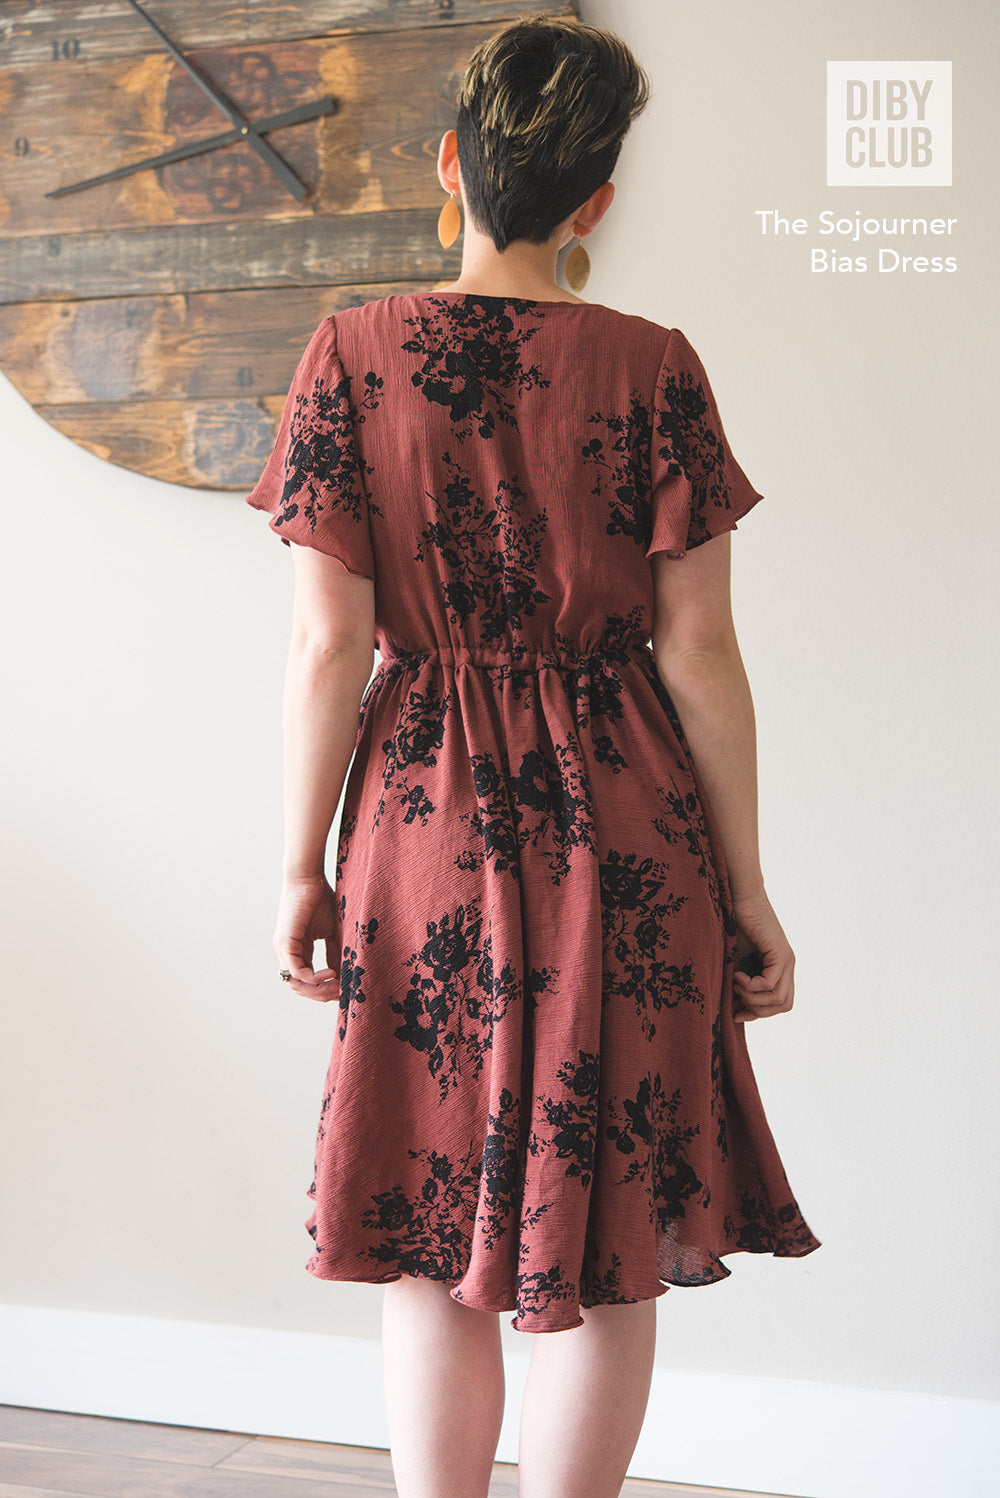 Back view of the Sojourner bias dress with high-low hem.